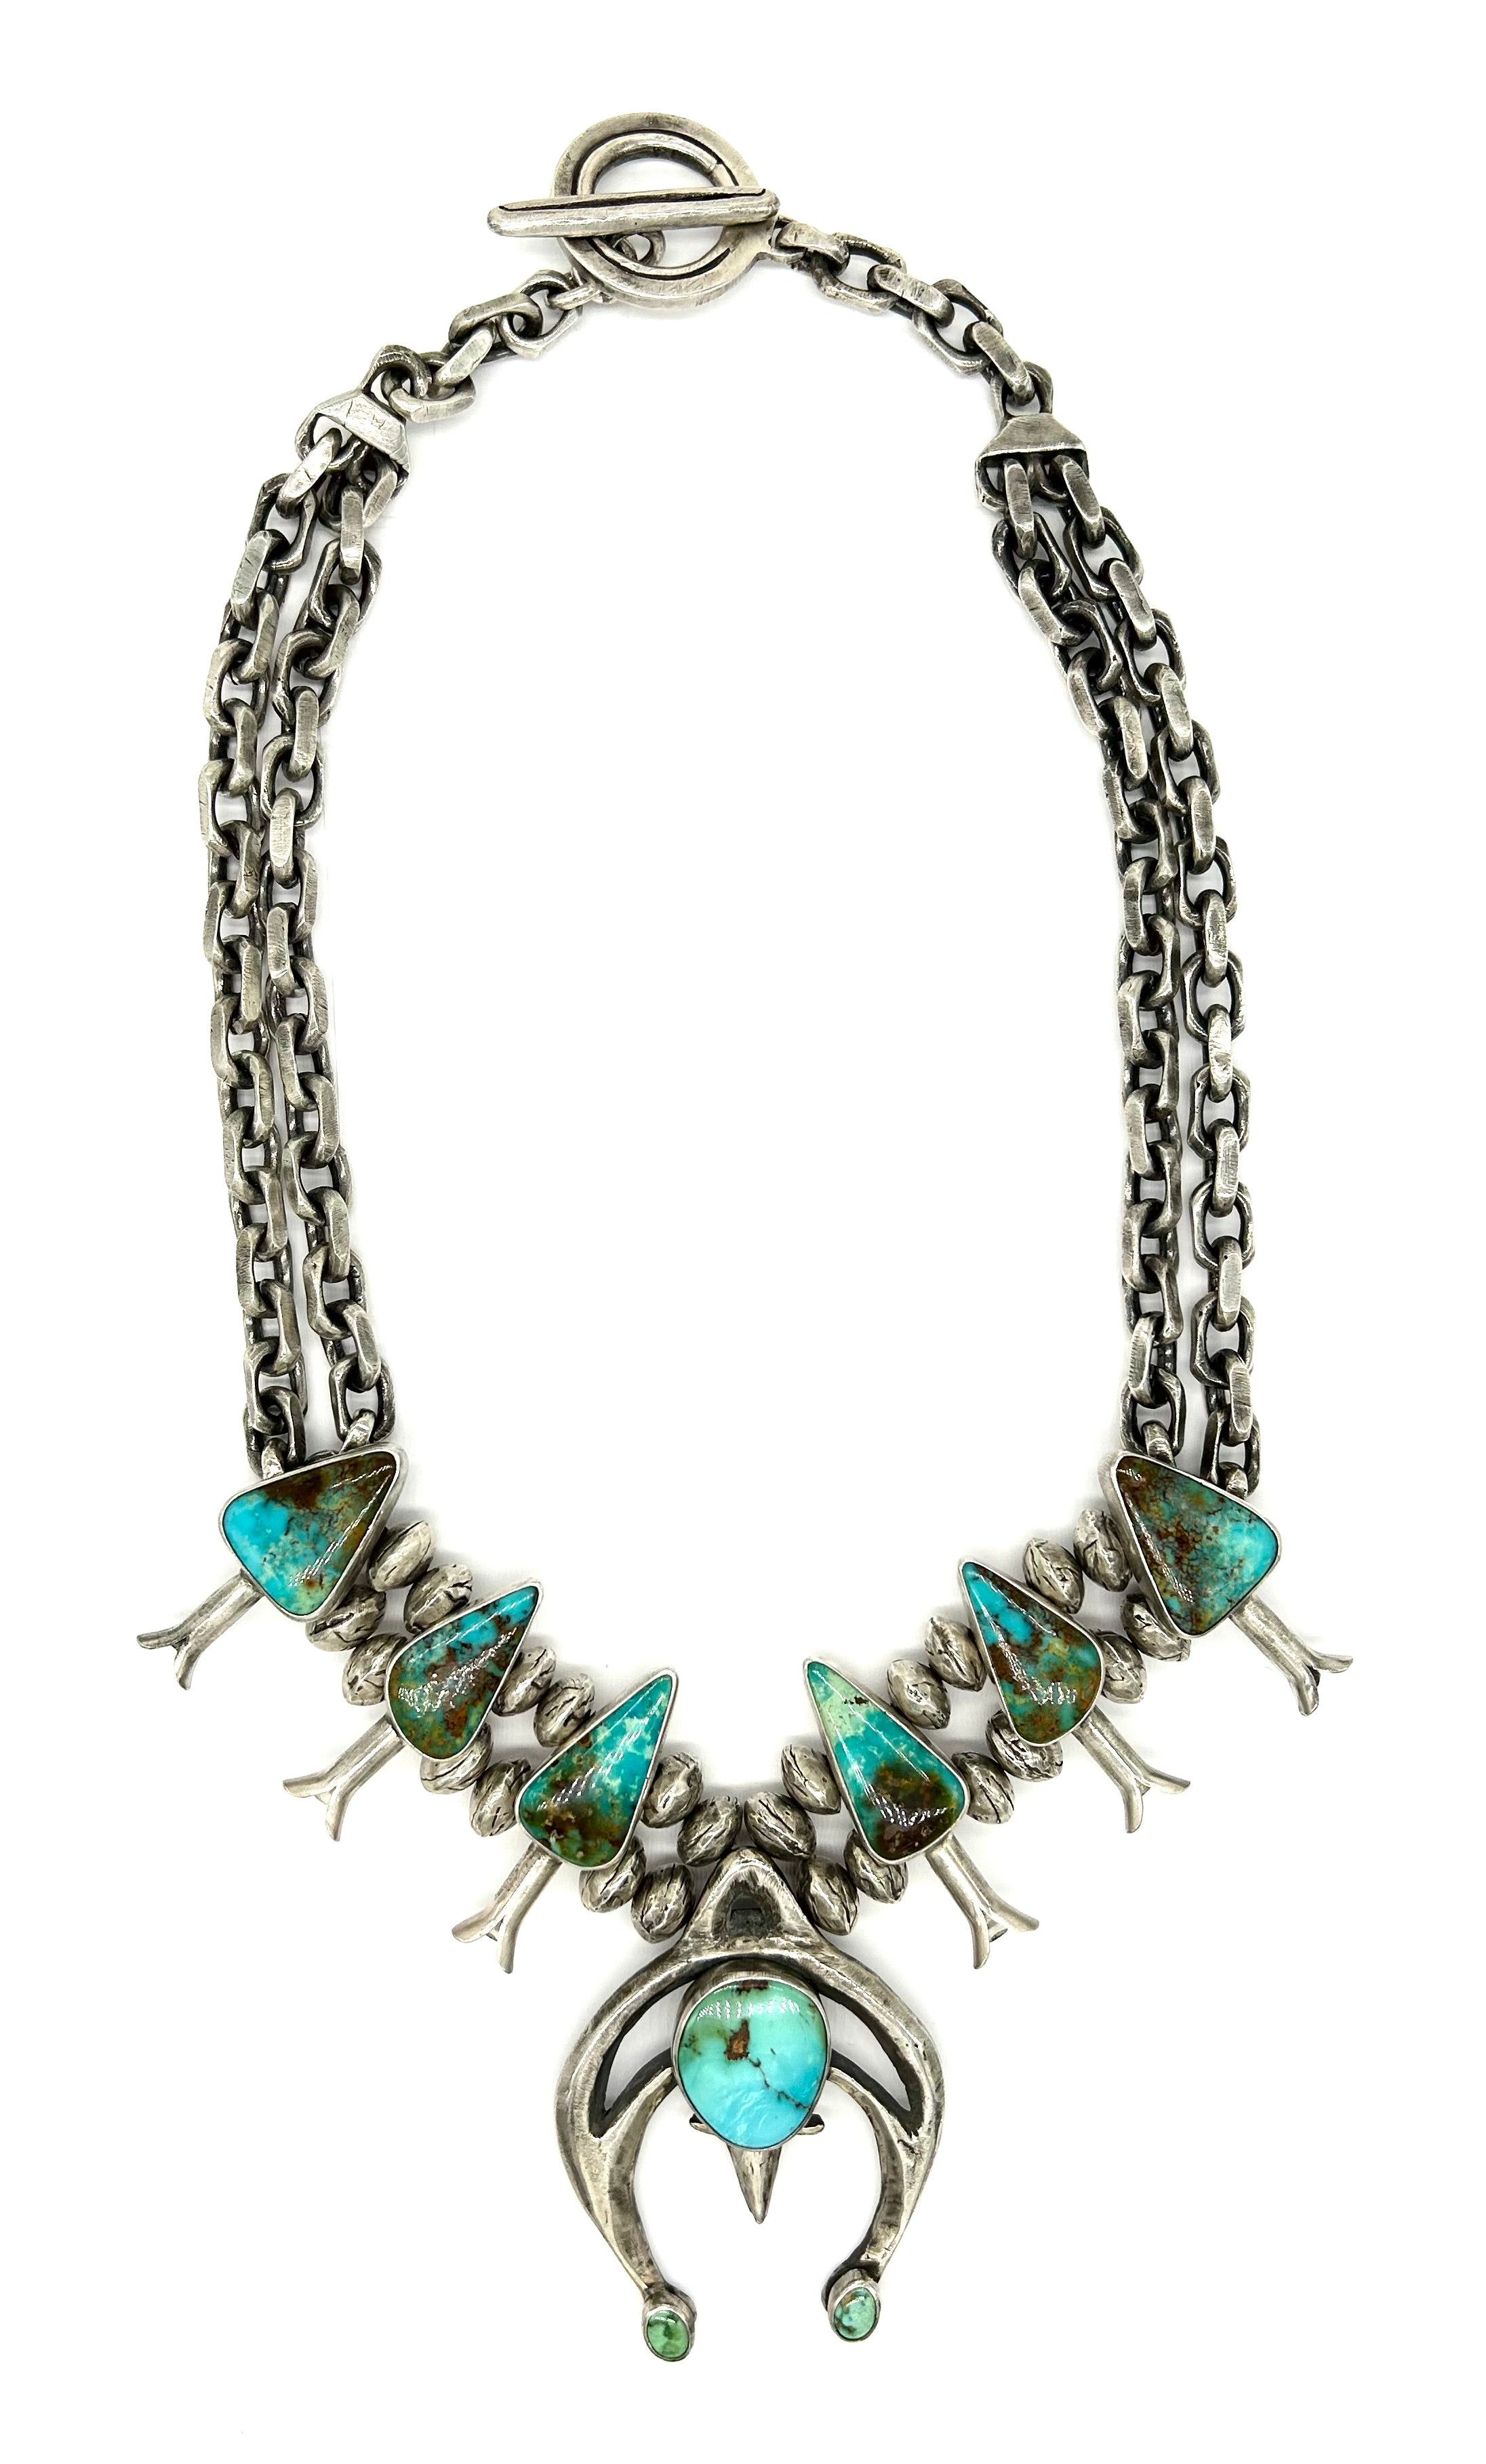 Sold at Auction: MORENCI TURQUOISE SQUASH BLOSSOM NECKLACE STERLING